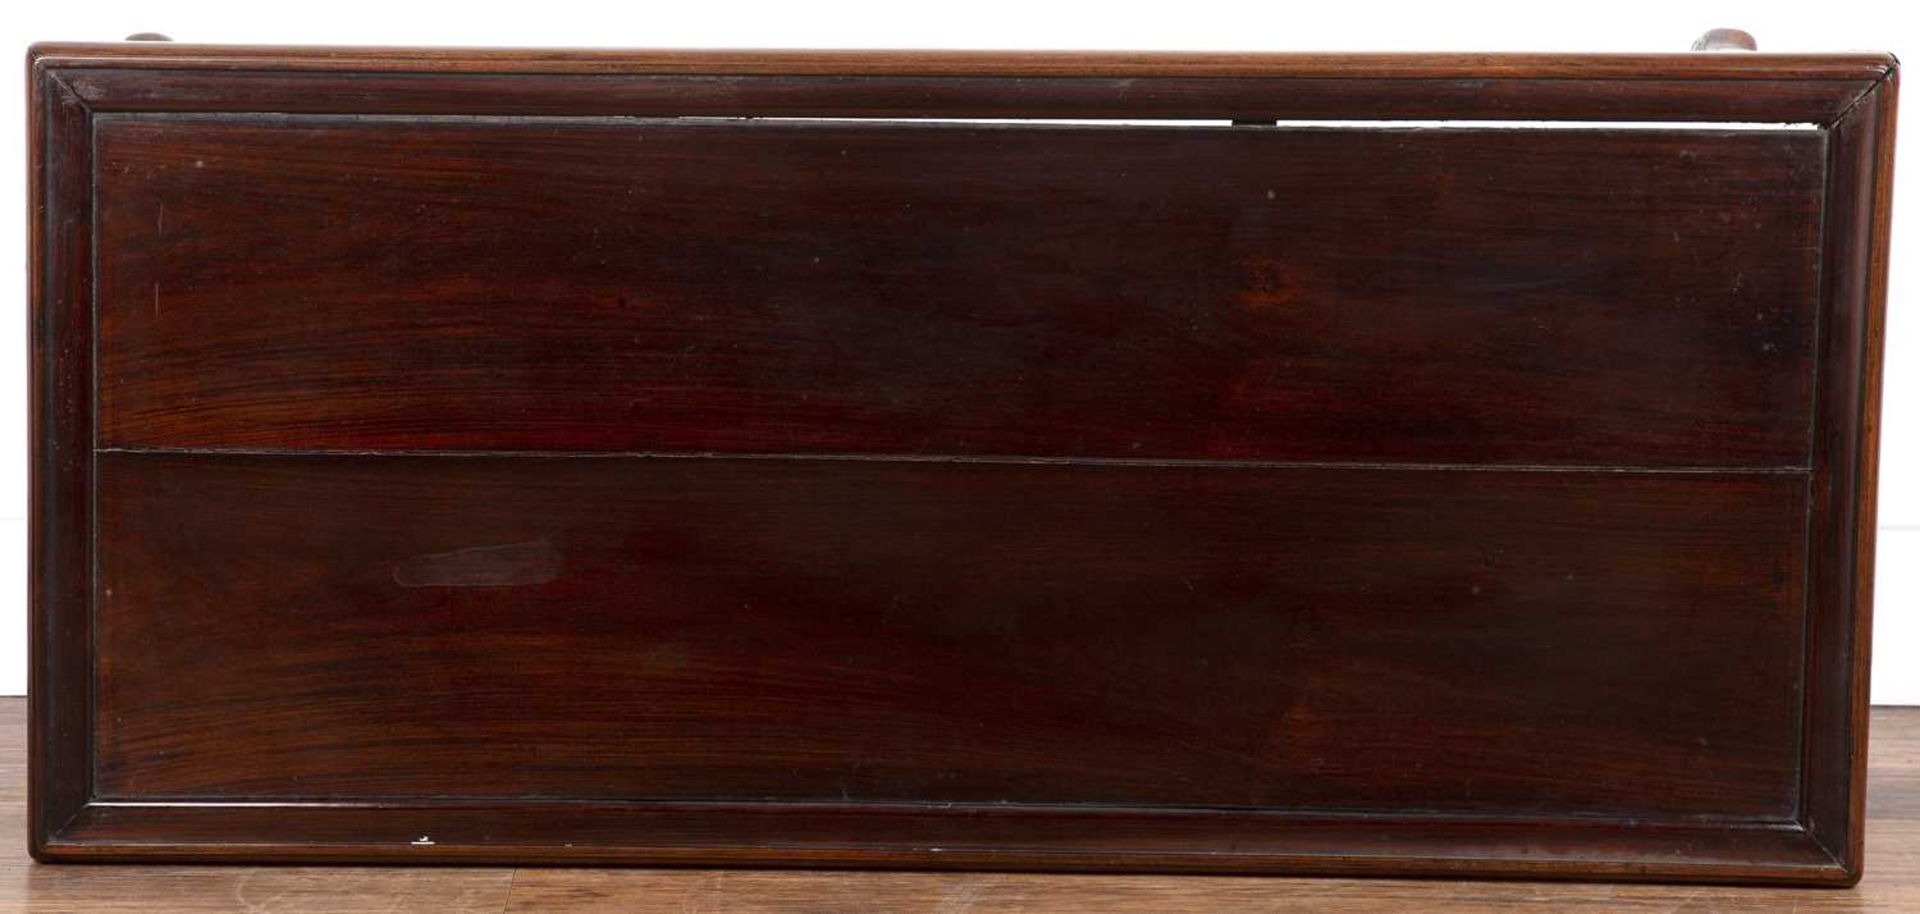 Chinese Hardwood low table 19th Century, with scroll frieze and shaped supports, 127cm long, 56cm - Image 5 of 5